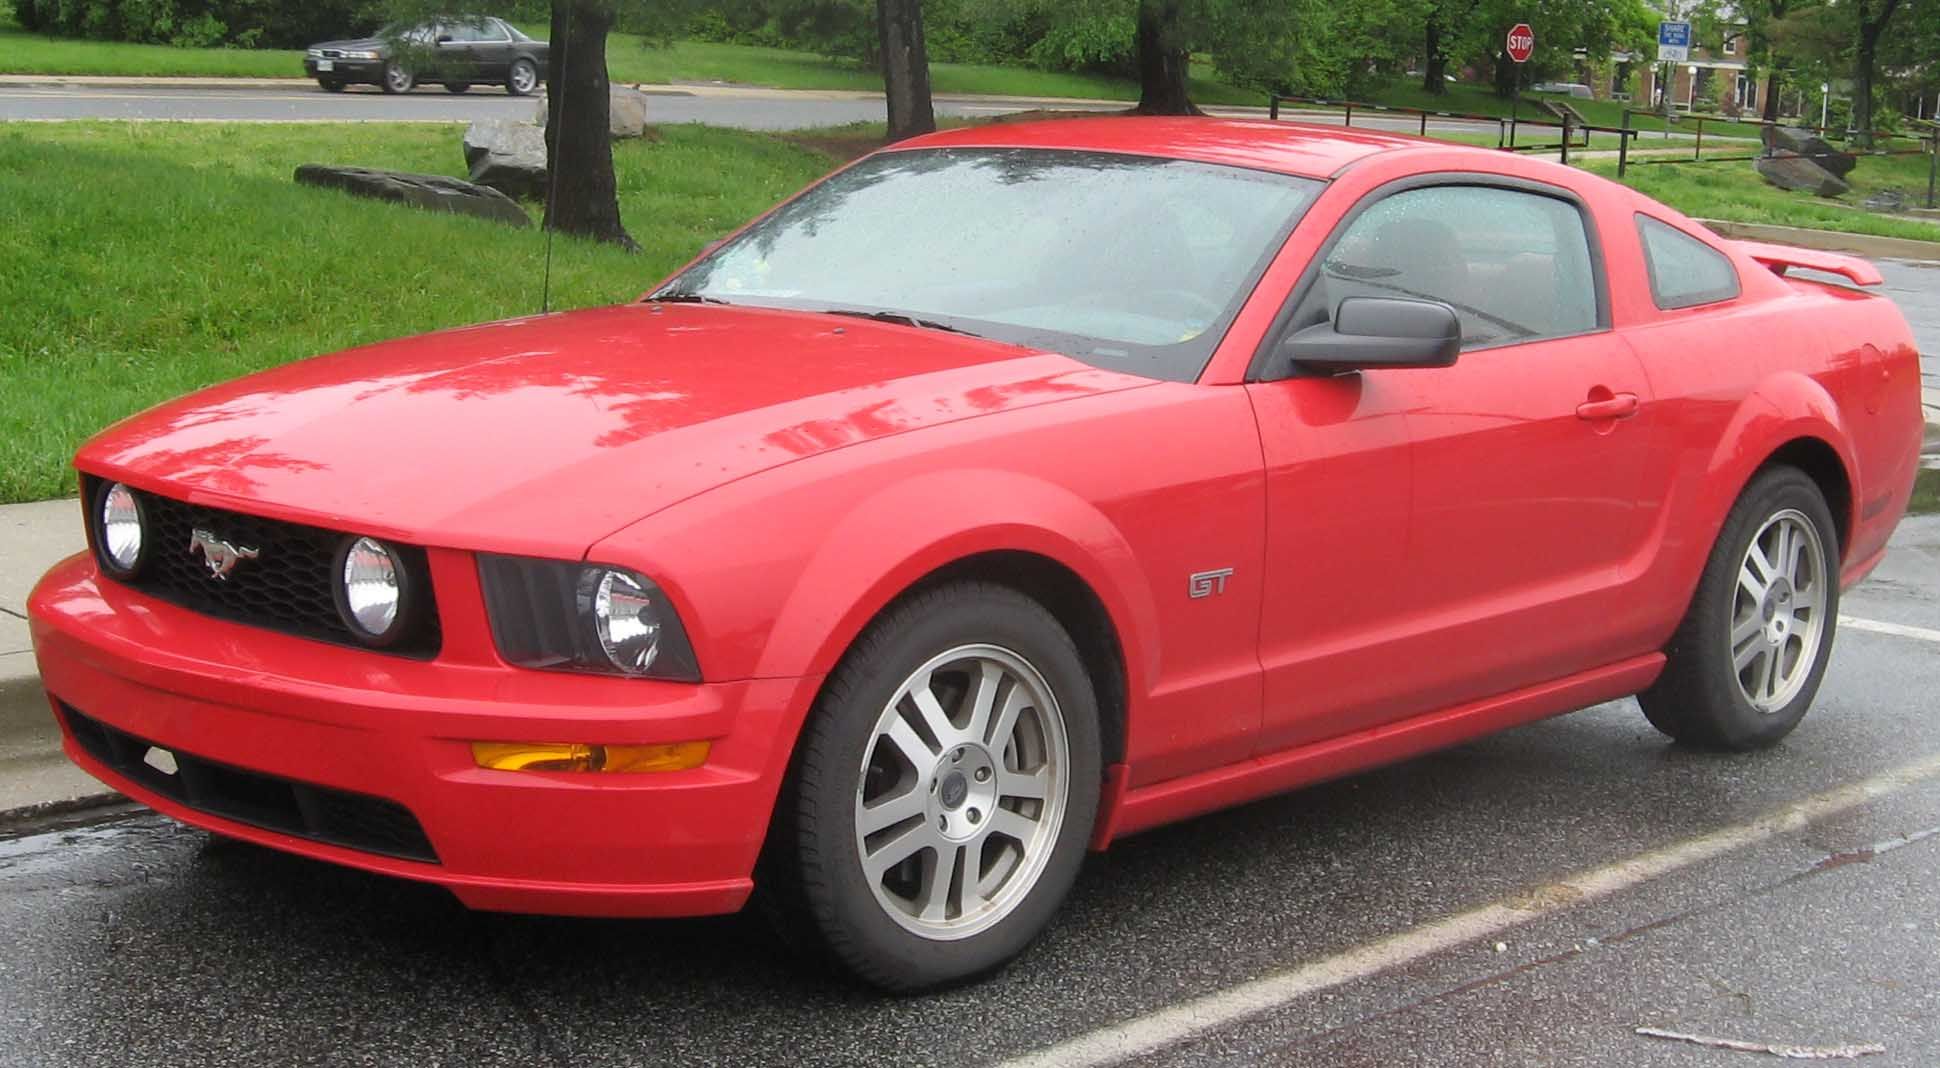 2005 Ford Mustang GT at a parking